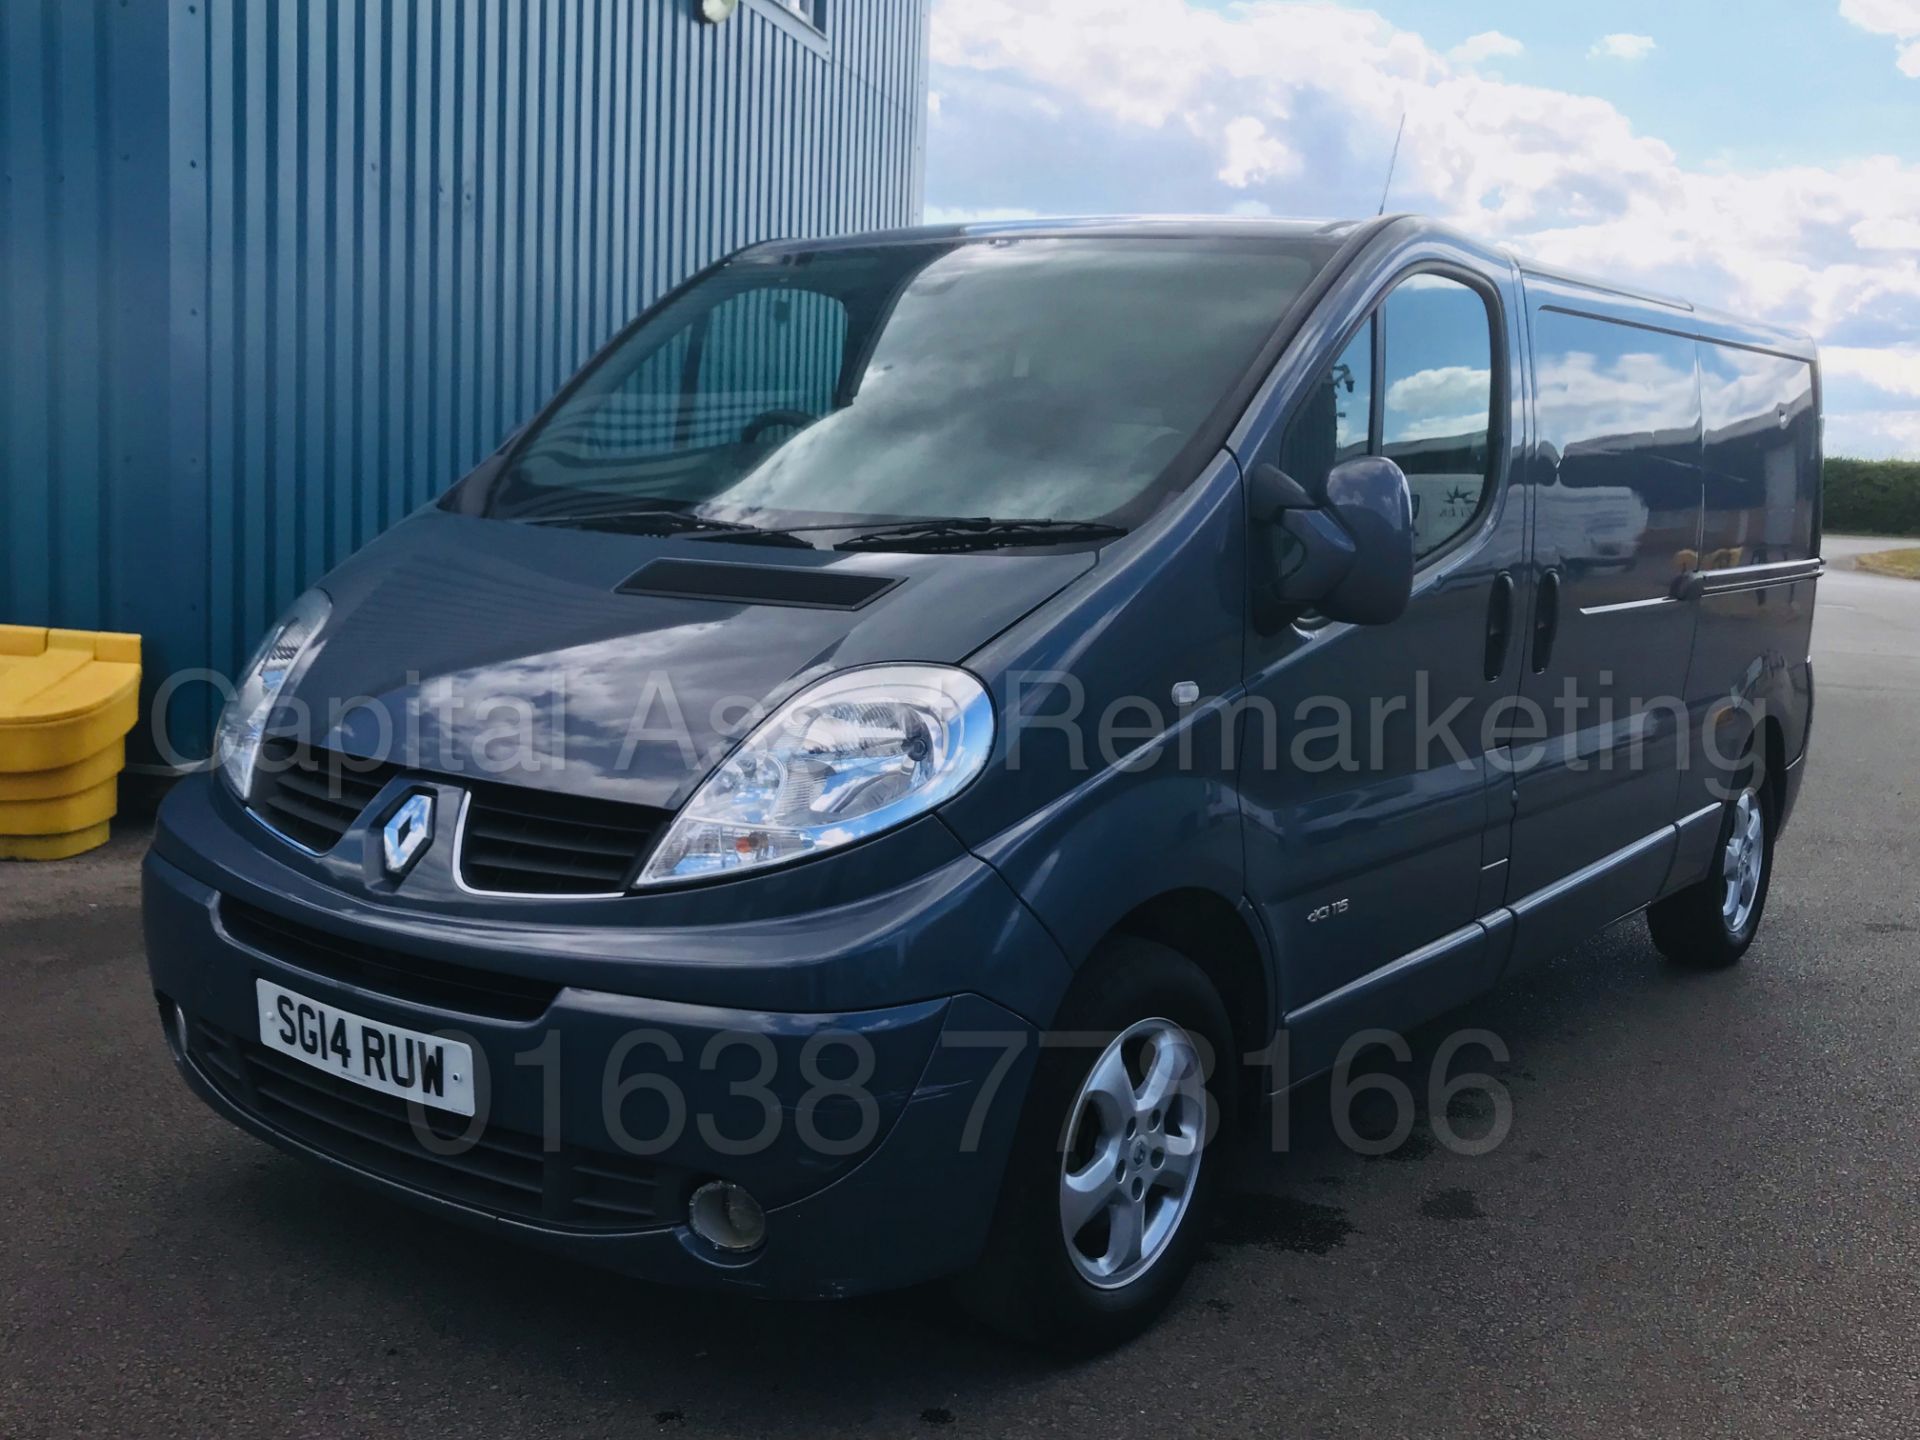 (On Sale) RENAULT TRAFIC 'SPORT EDITION' LWB (2014) '2.0 DCI - 115 BHP - 6 SPEED' *AIR CON* (NO VAT) - Image 3 of 40